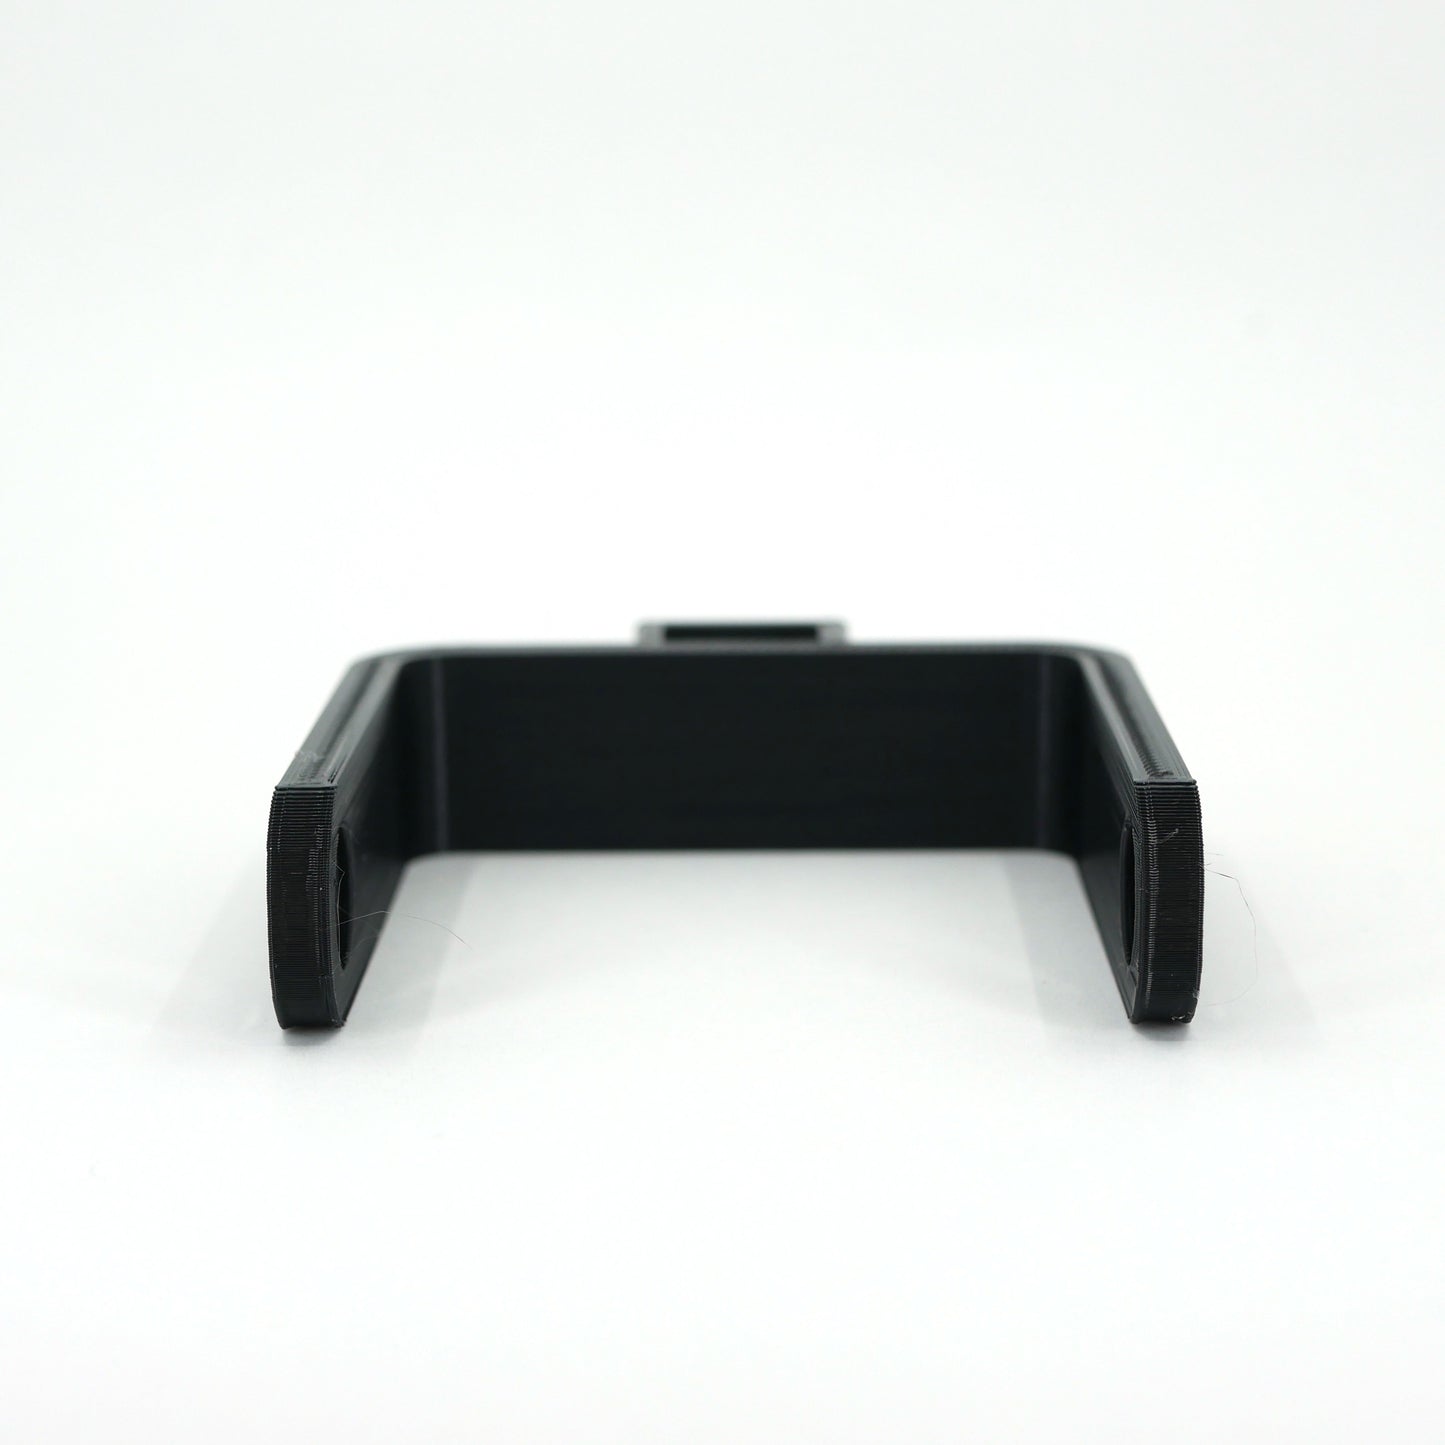 The front of a black microphone mount for the FIFINE K678 microphone.